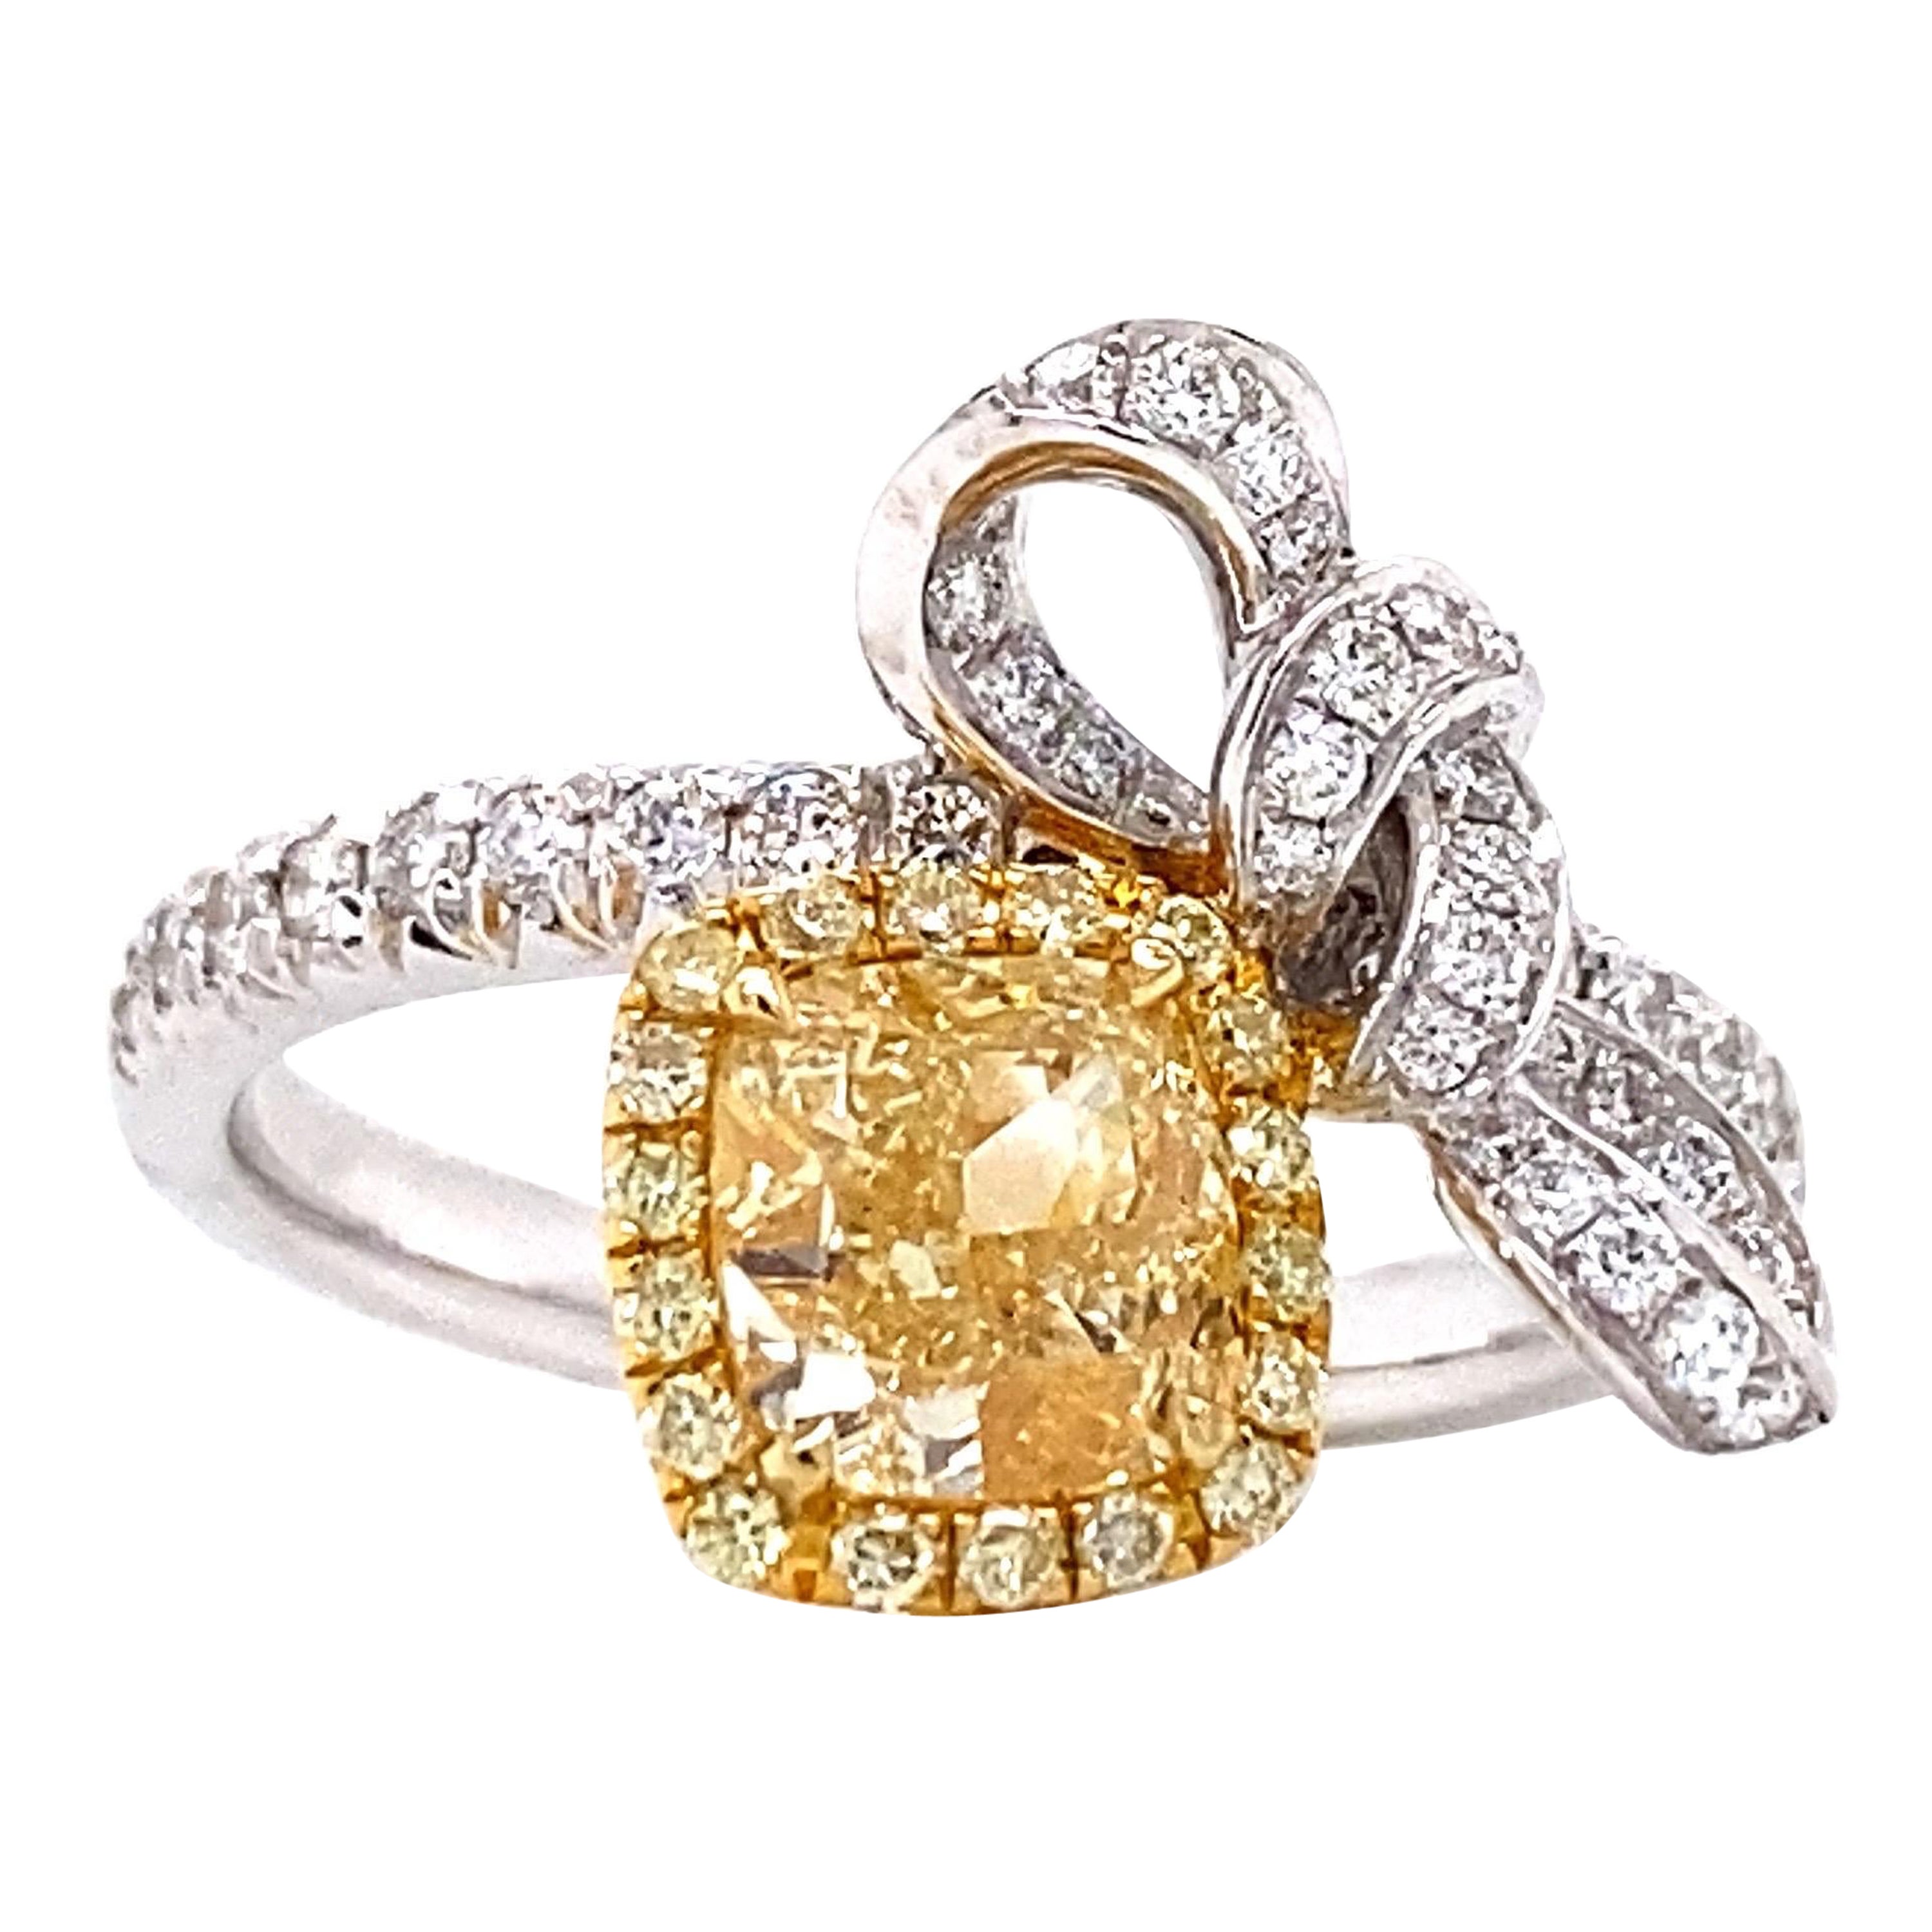 Emilio Jewelry GIA Certified 1.24 Carat Diamond Ring For Sale at 1stDibs |  how big is a 24 carat diamond, 24 carat diamond rings, 24 carat ring